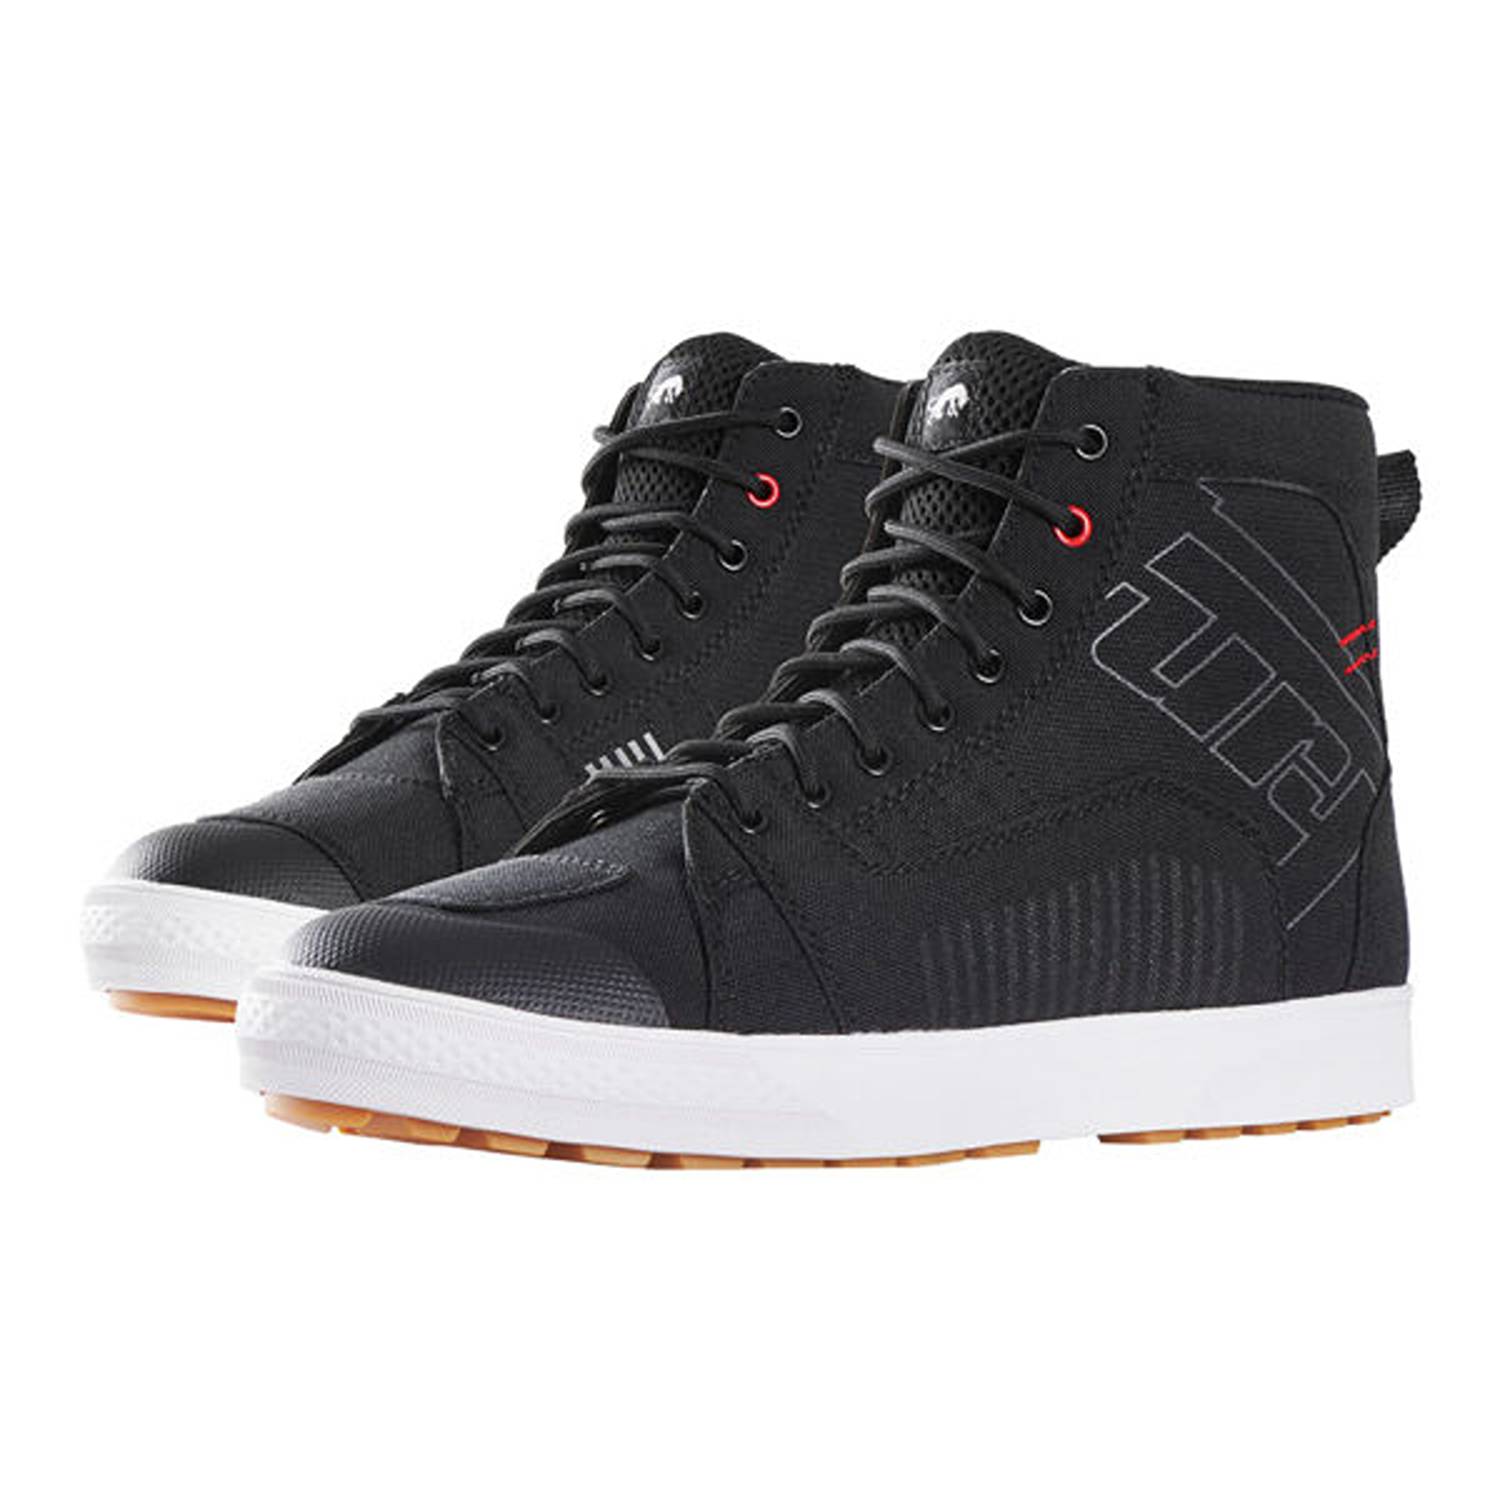 Image of EU Furygan Stockton Air D30 Shoes Black Red Taille 42